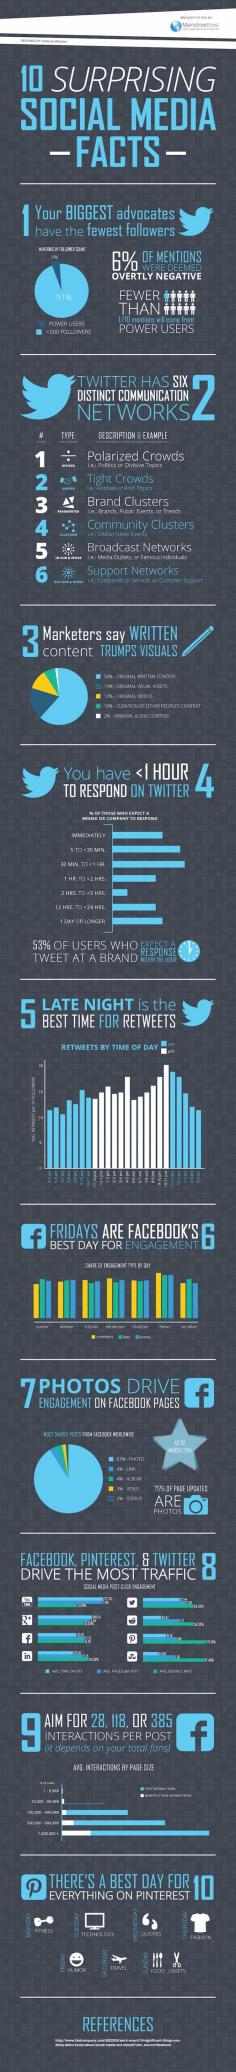 10 Surprising Social Media Facts [INFOGRAPHIC]